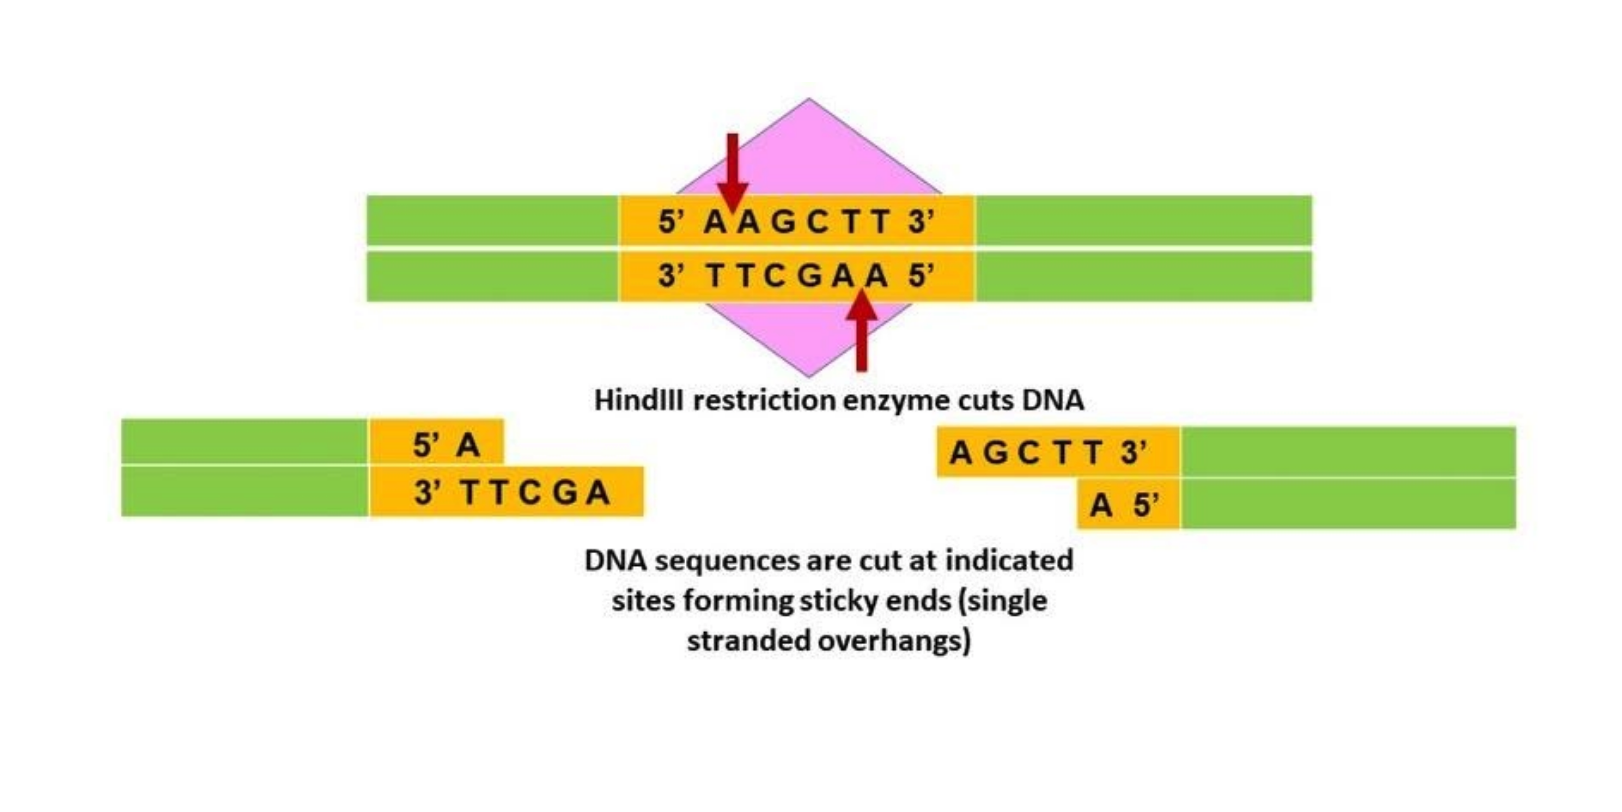 This is a complex image depicting the recognition sequence for HindIII and the resulting cut made to DNA.